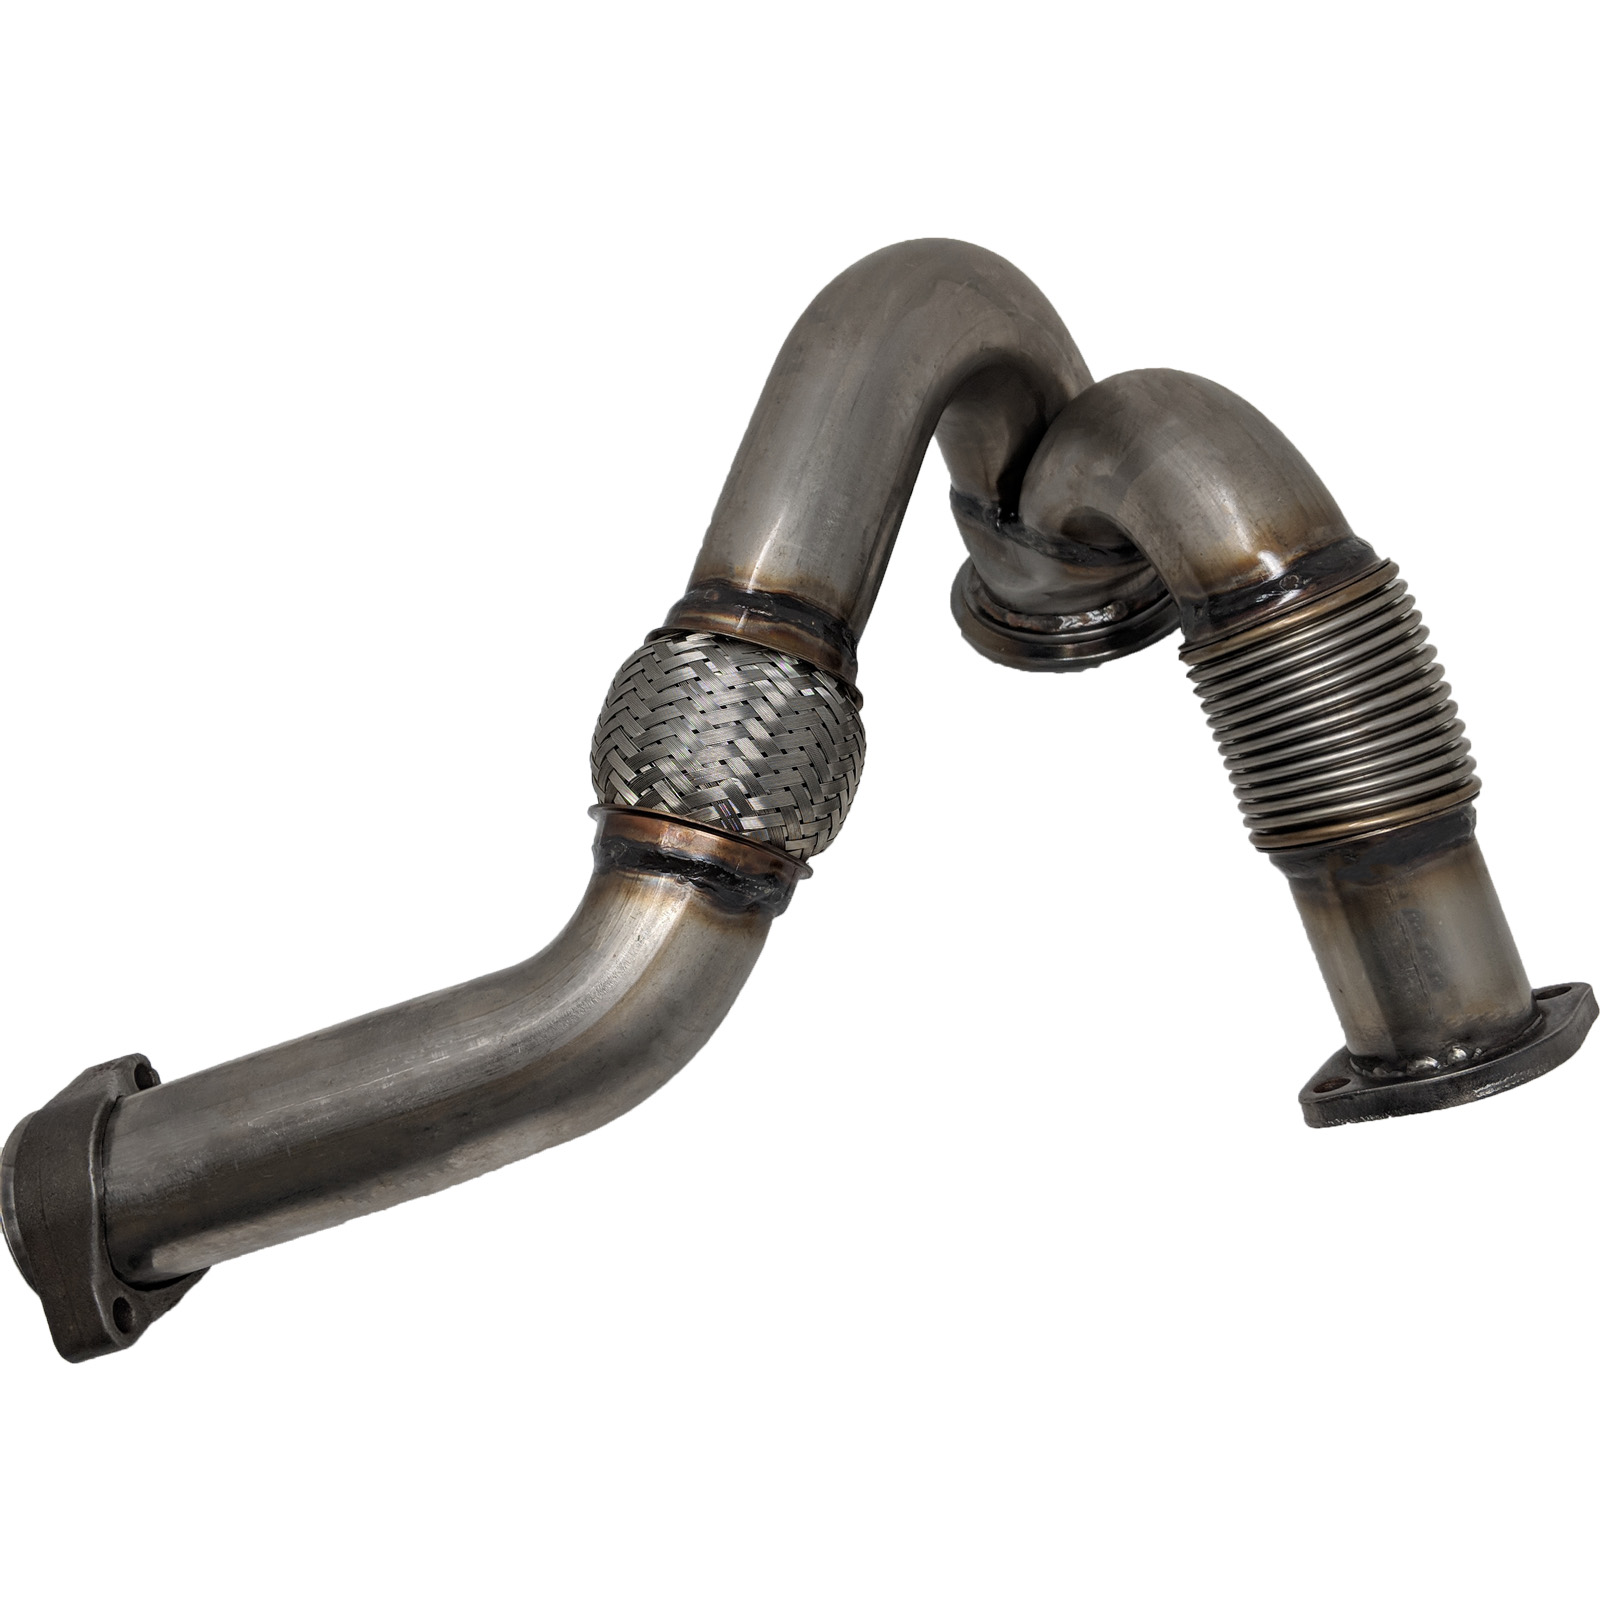 Turbo Exhaust Y-Pipe Up Pipe For 2003-2007 Ford F250 F350 F450 F550 6.0L